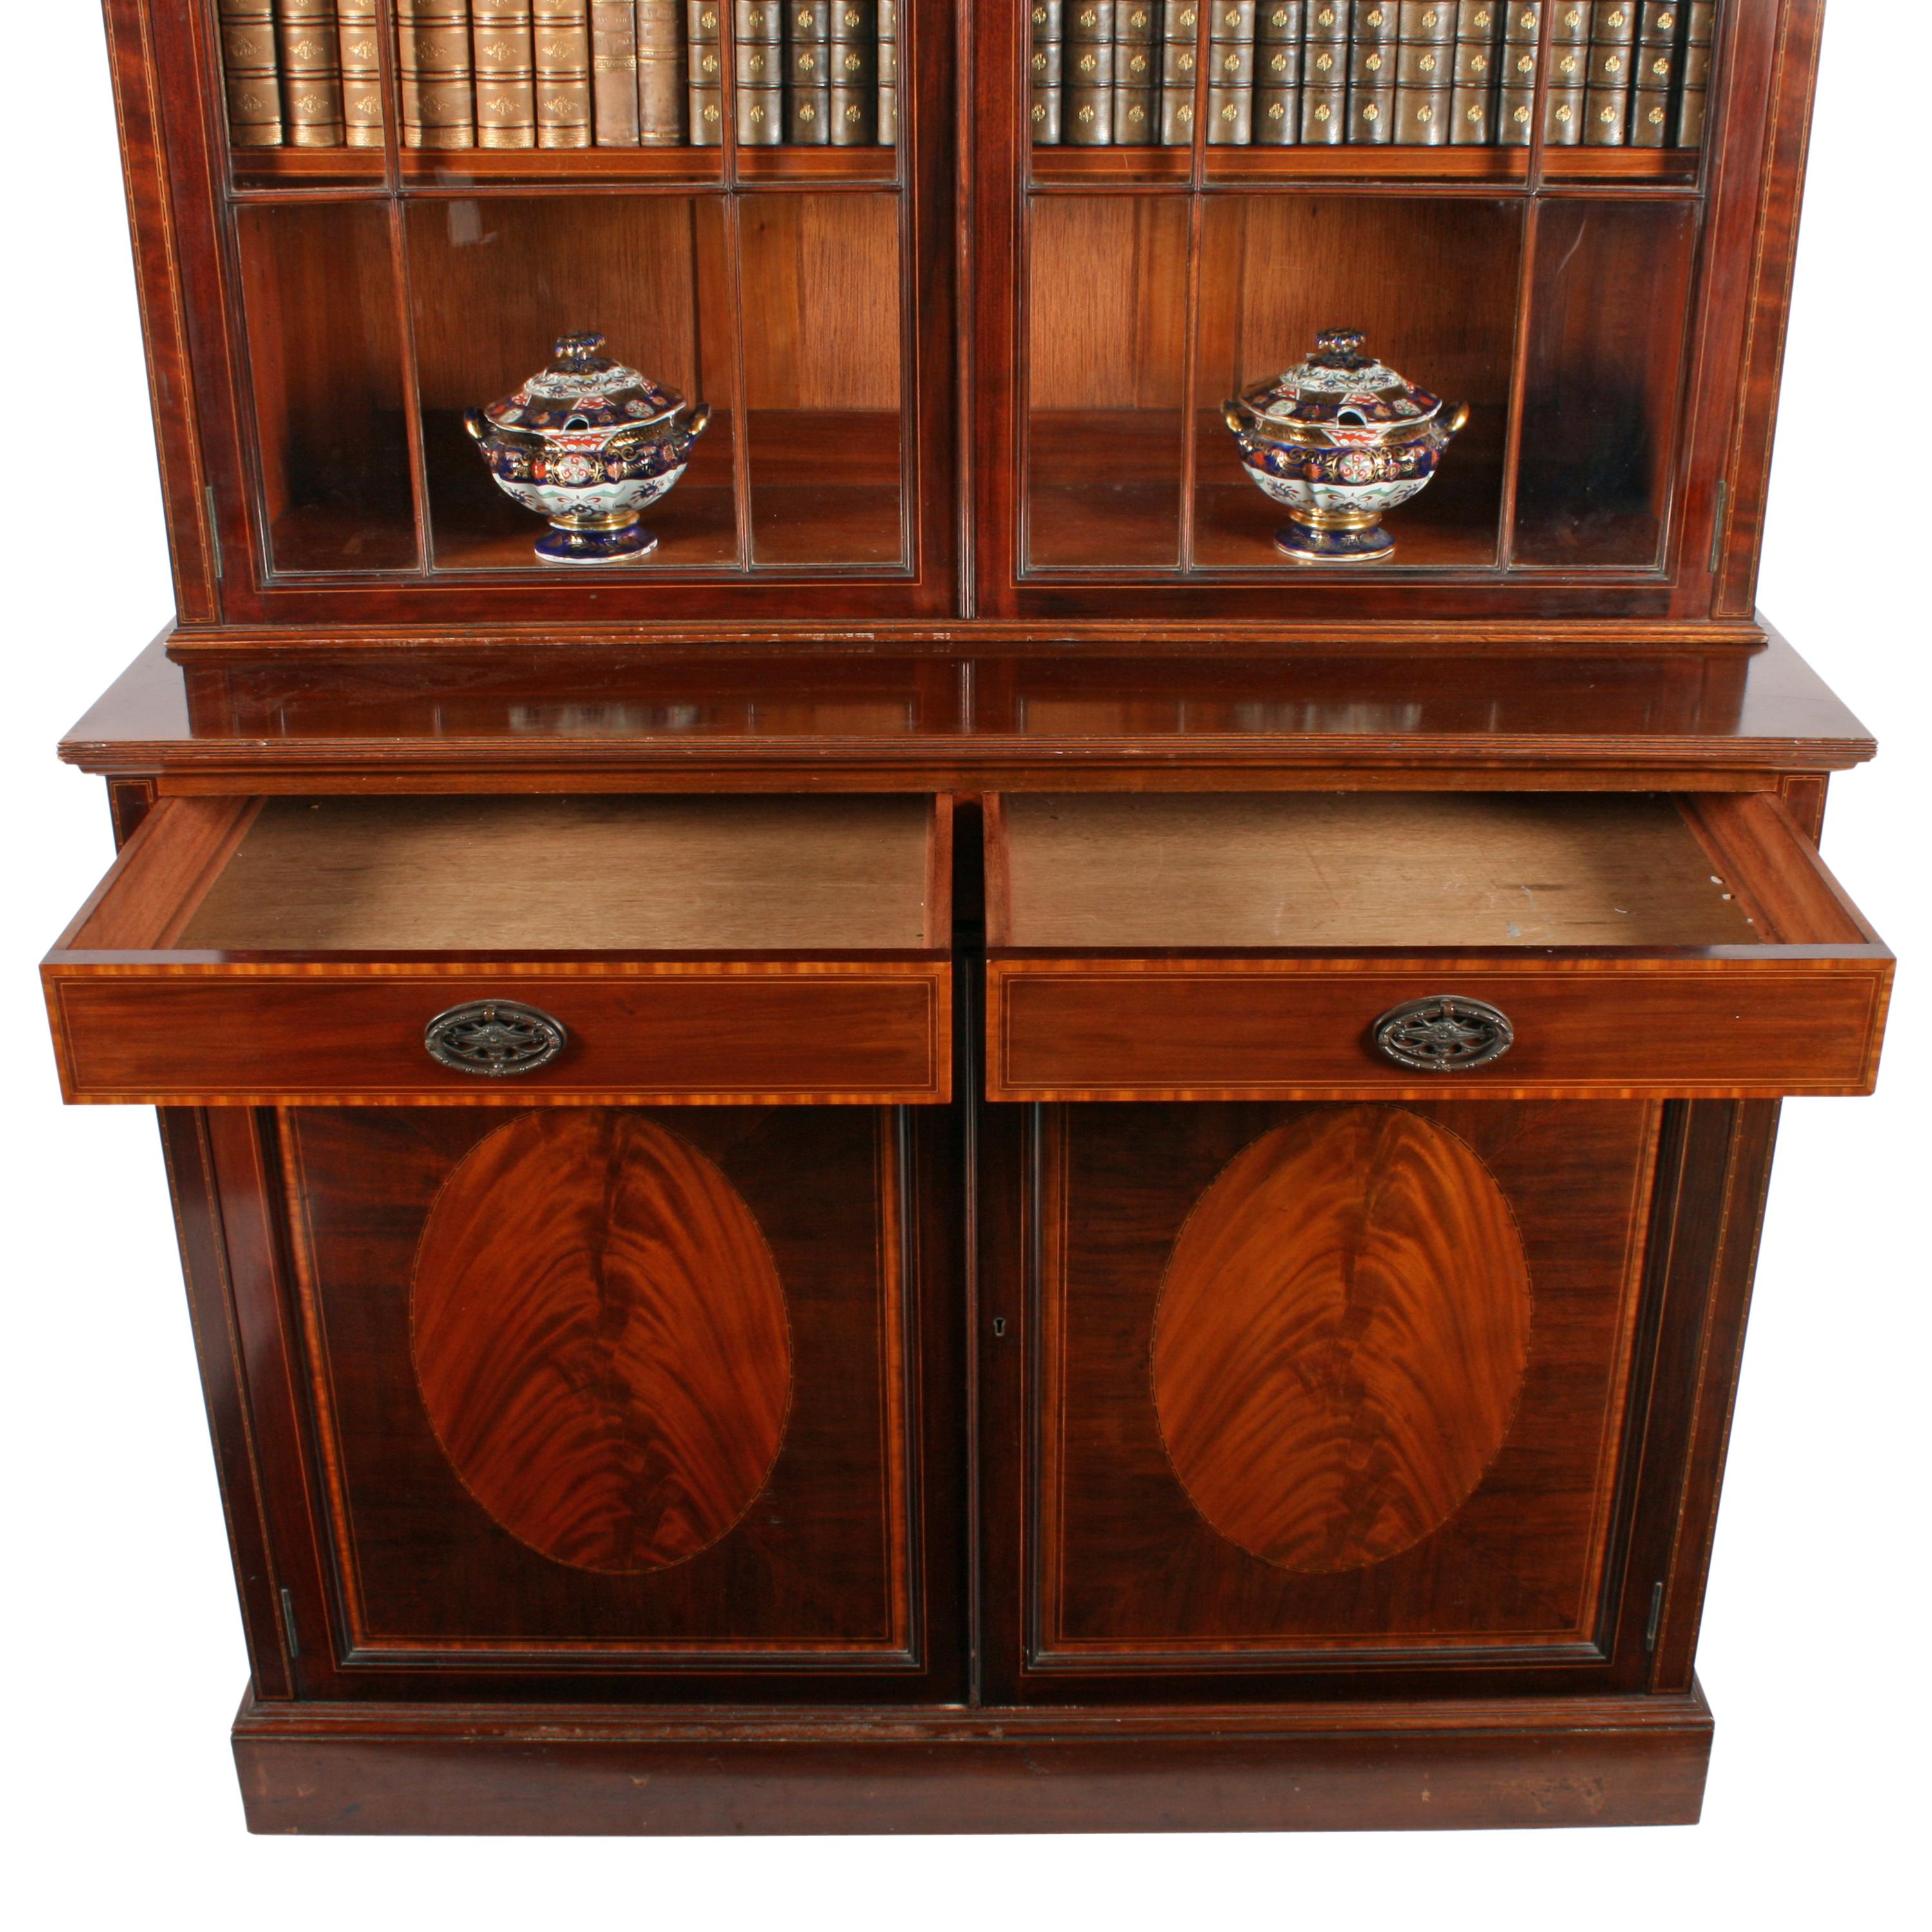 20th Century Mahogany Bookcase by Waring & Gillows For Sale